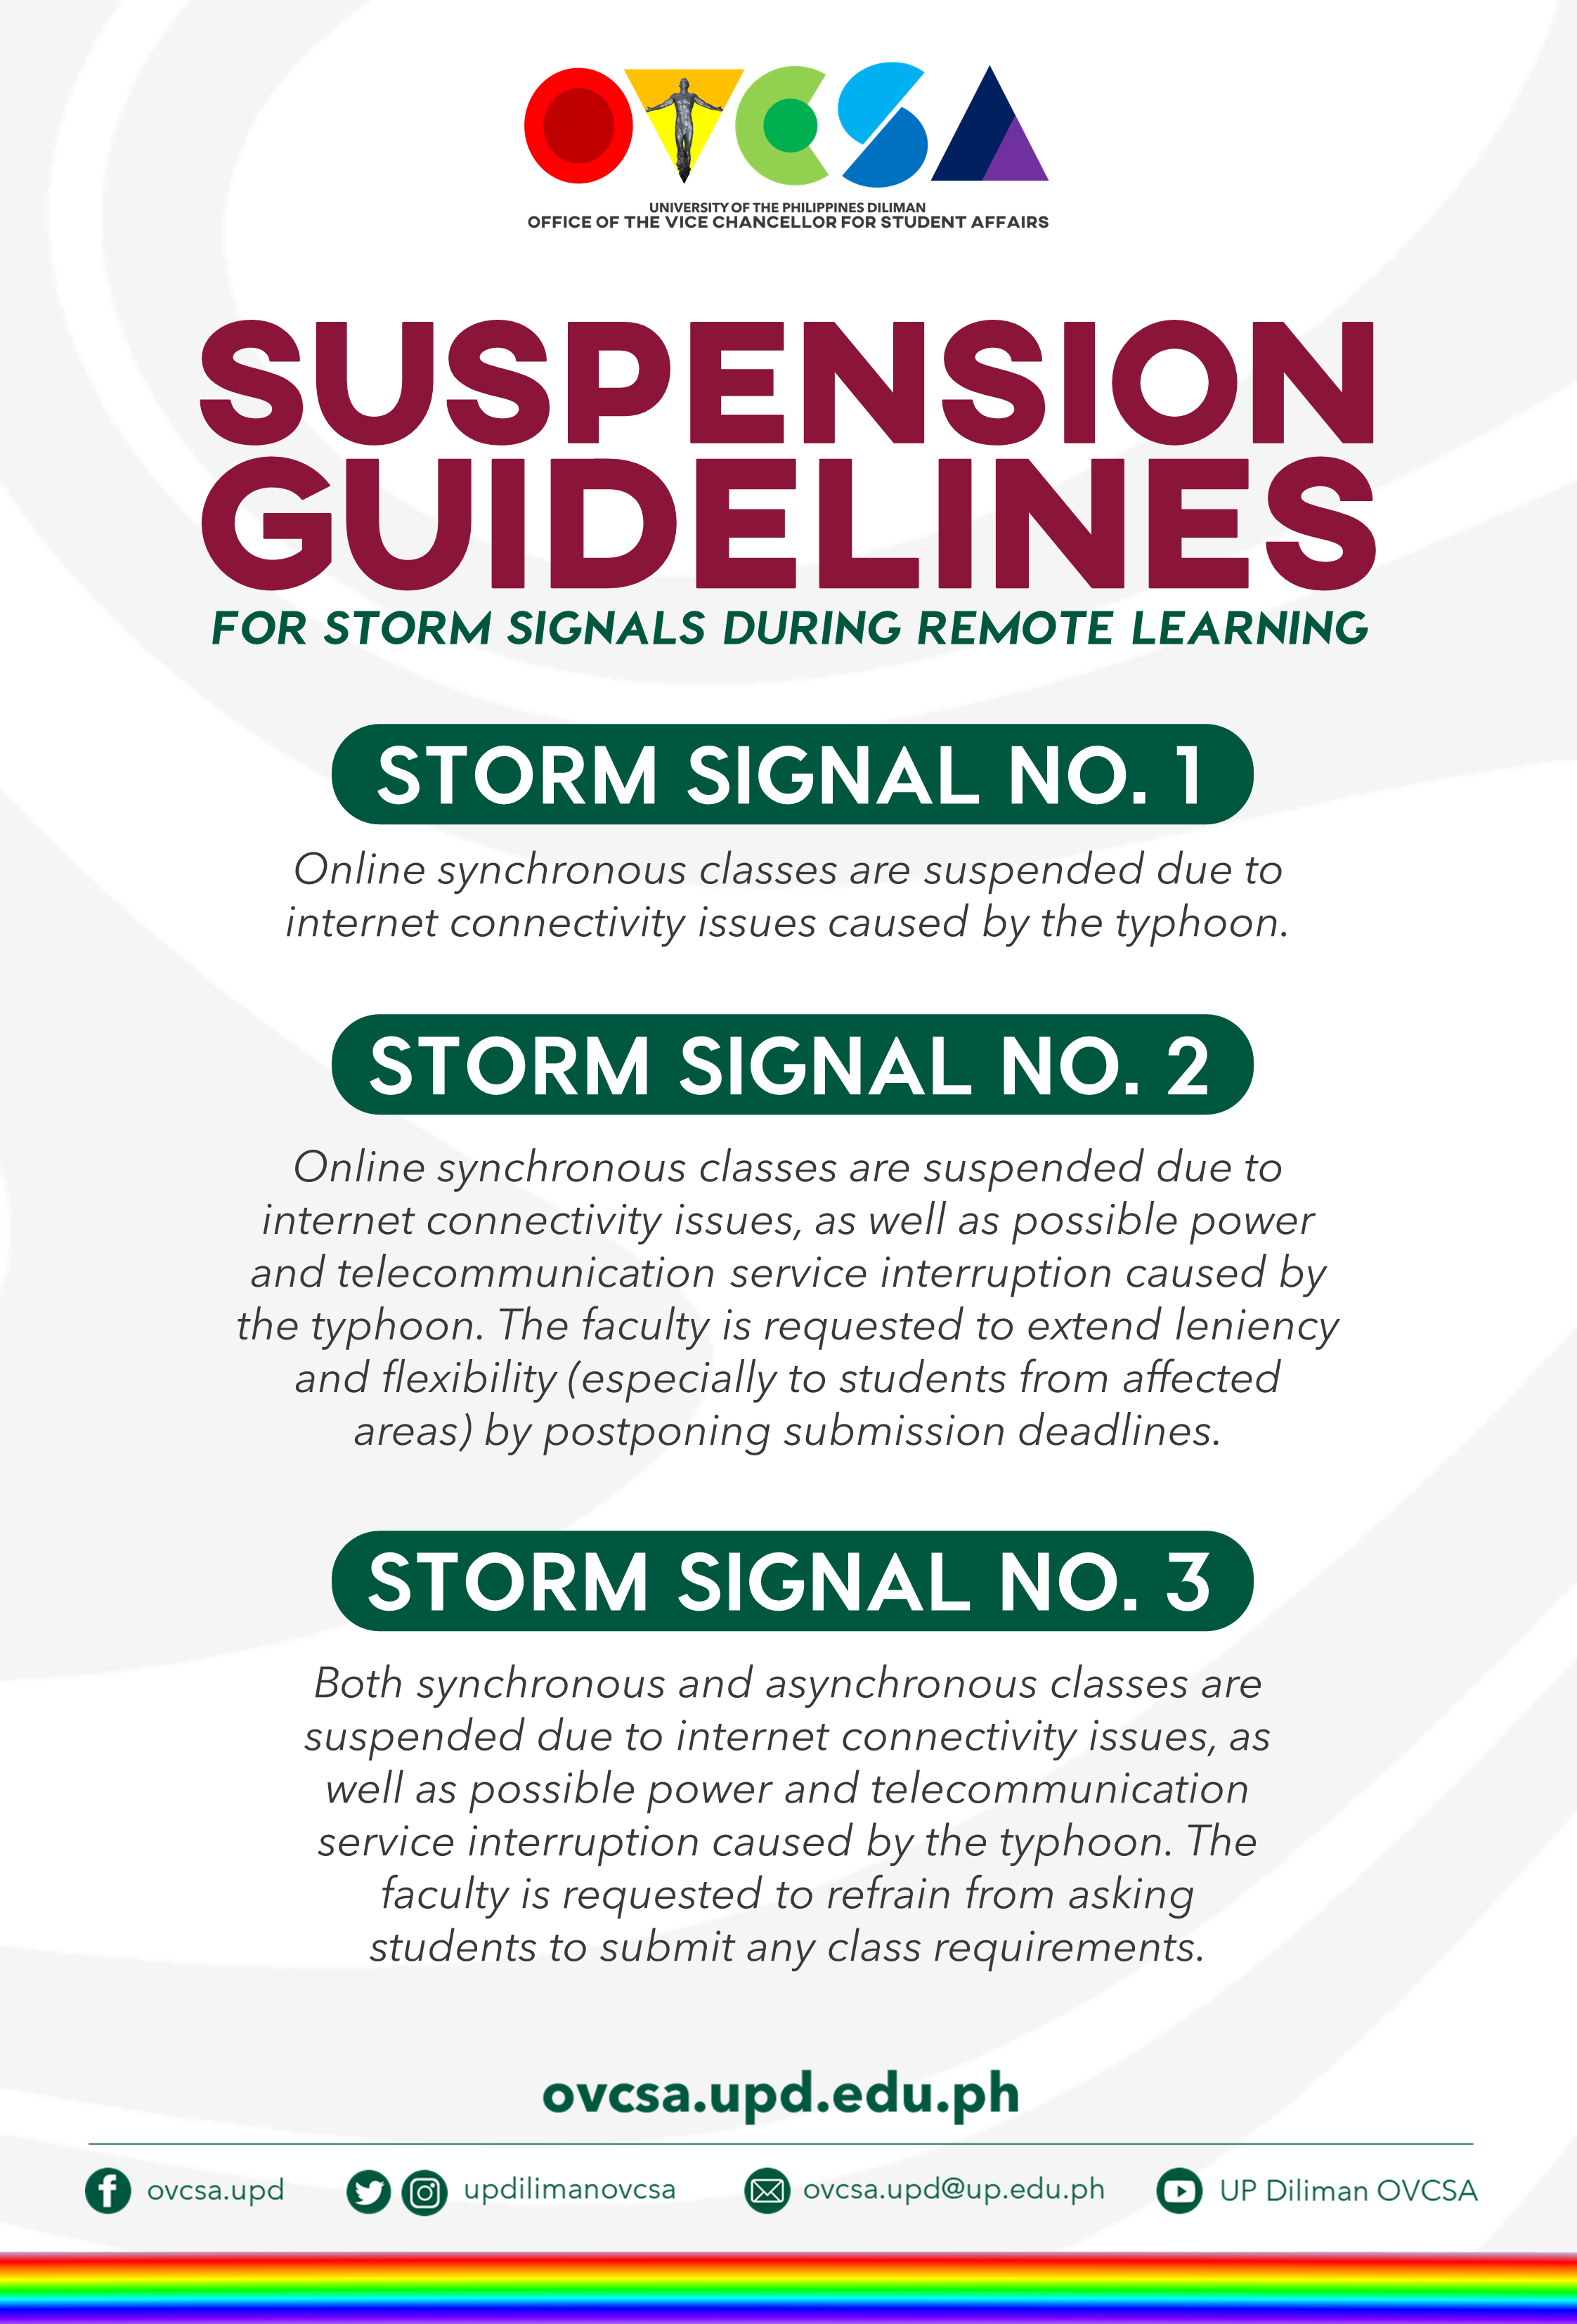 UPDATED] UP Diliman releases Guidelines for Suspension of Classes - UP  Diliman Office of the Vice Chancellor for Student Affairs